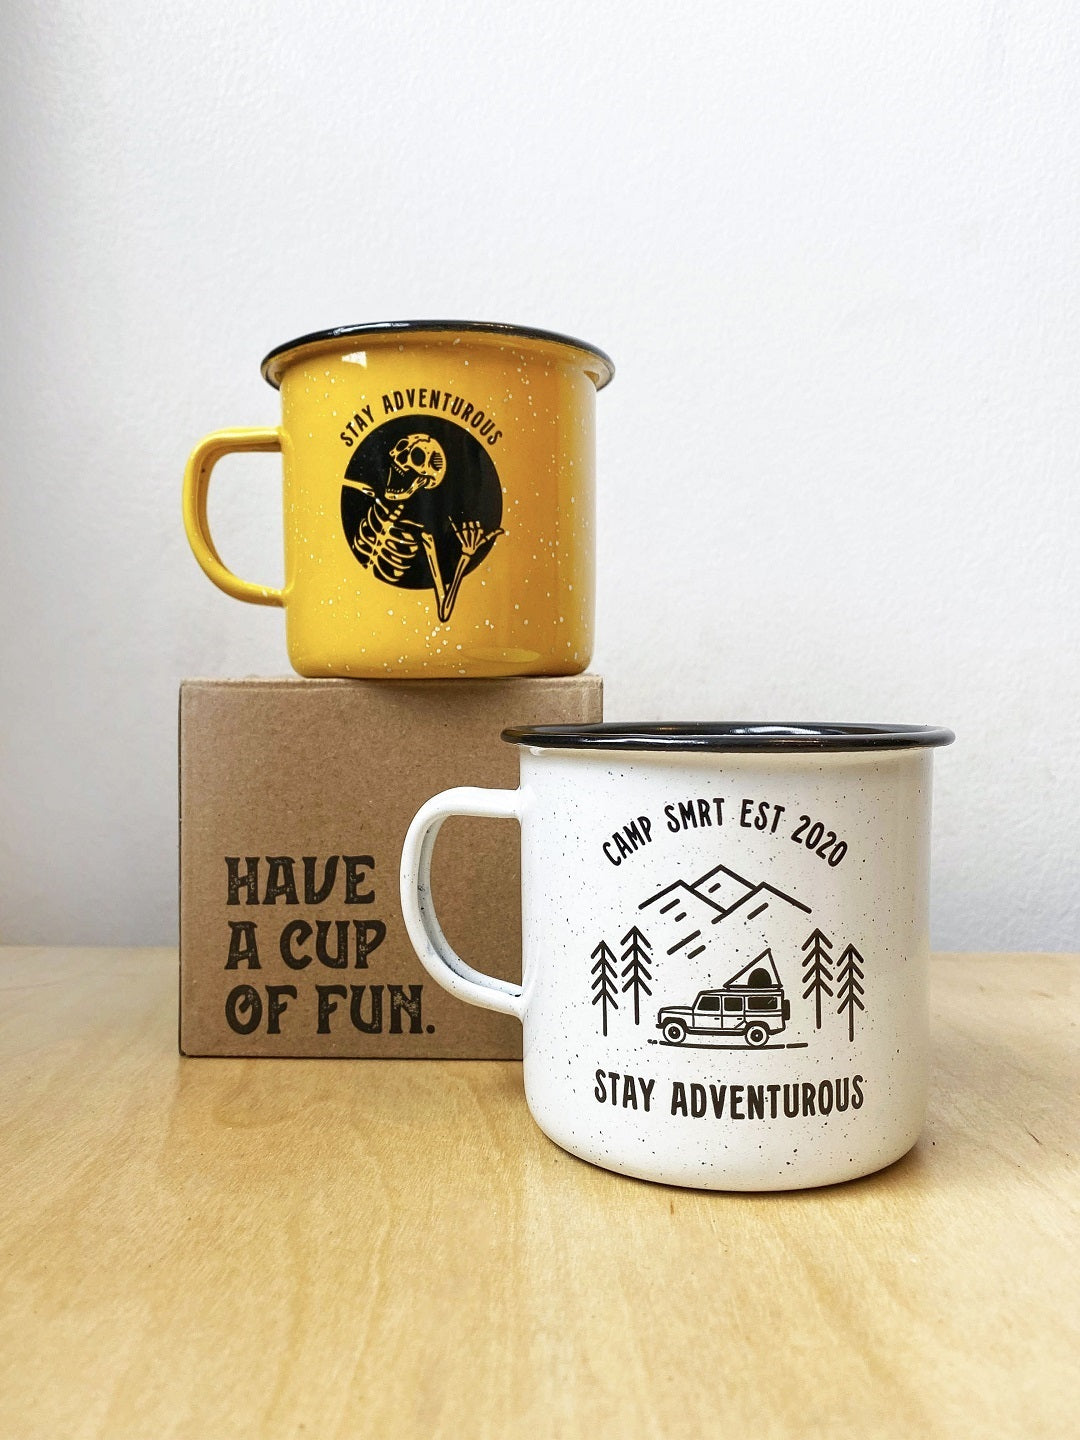 Ello Products - Not your grandpa's camp cup! Our Campy travel mug